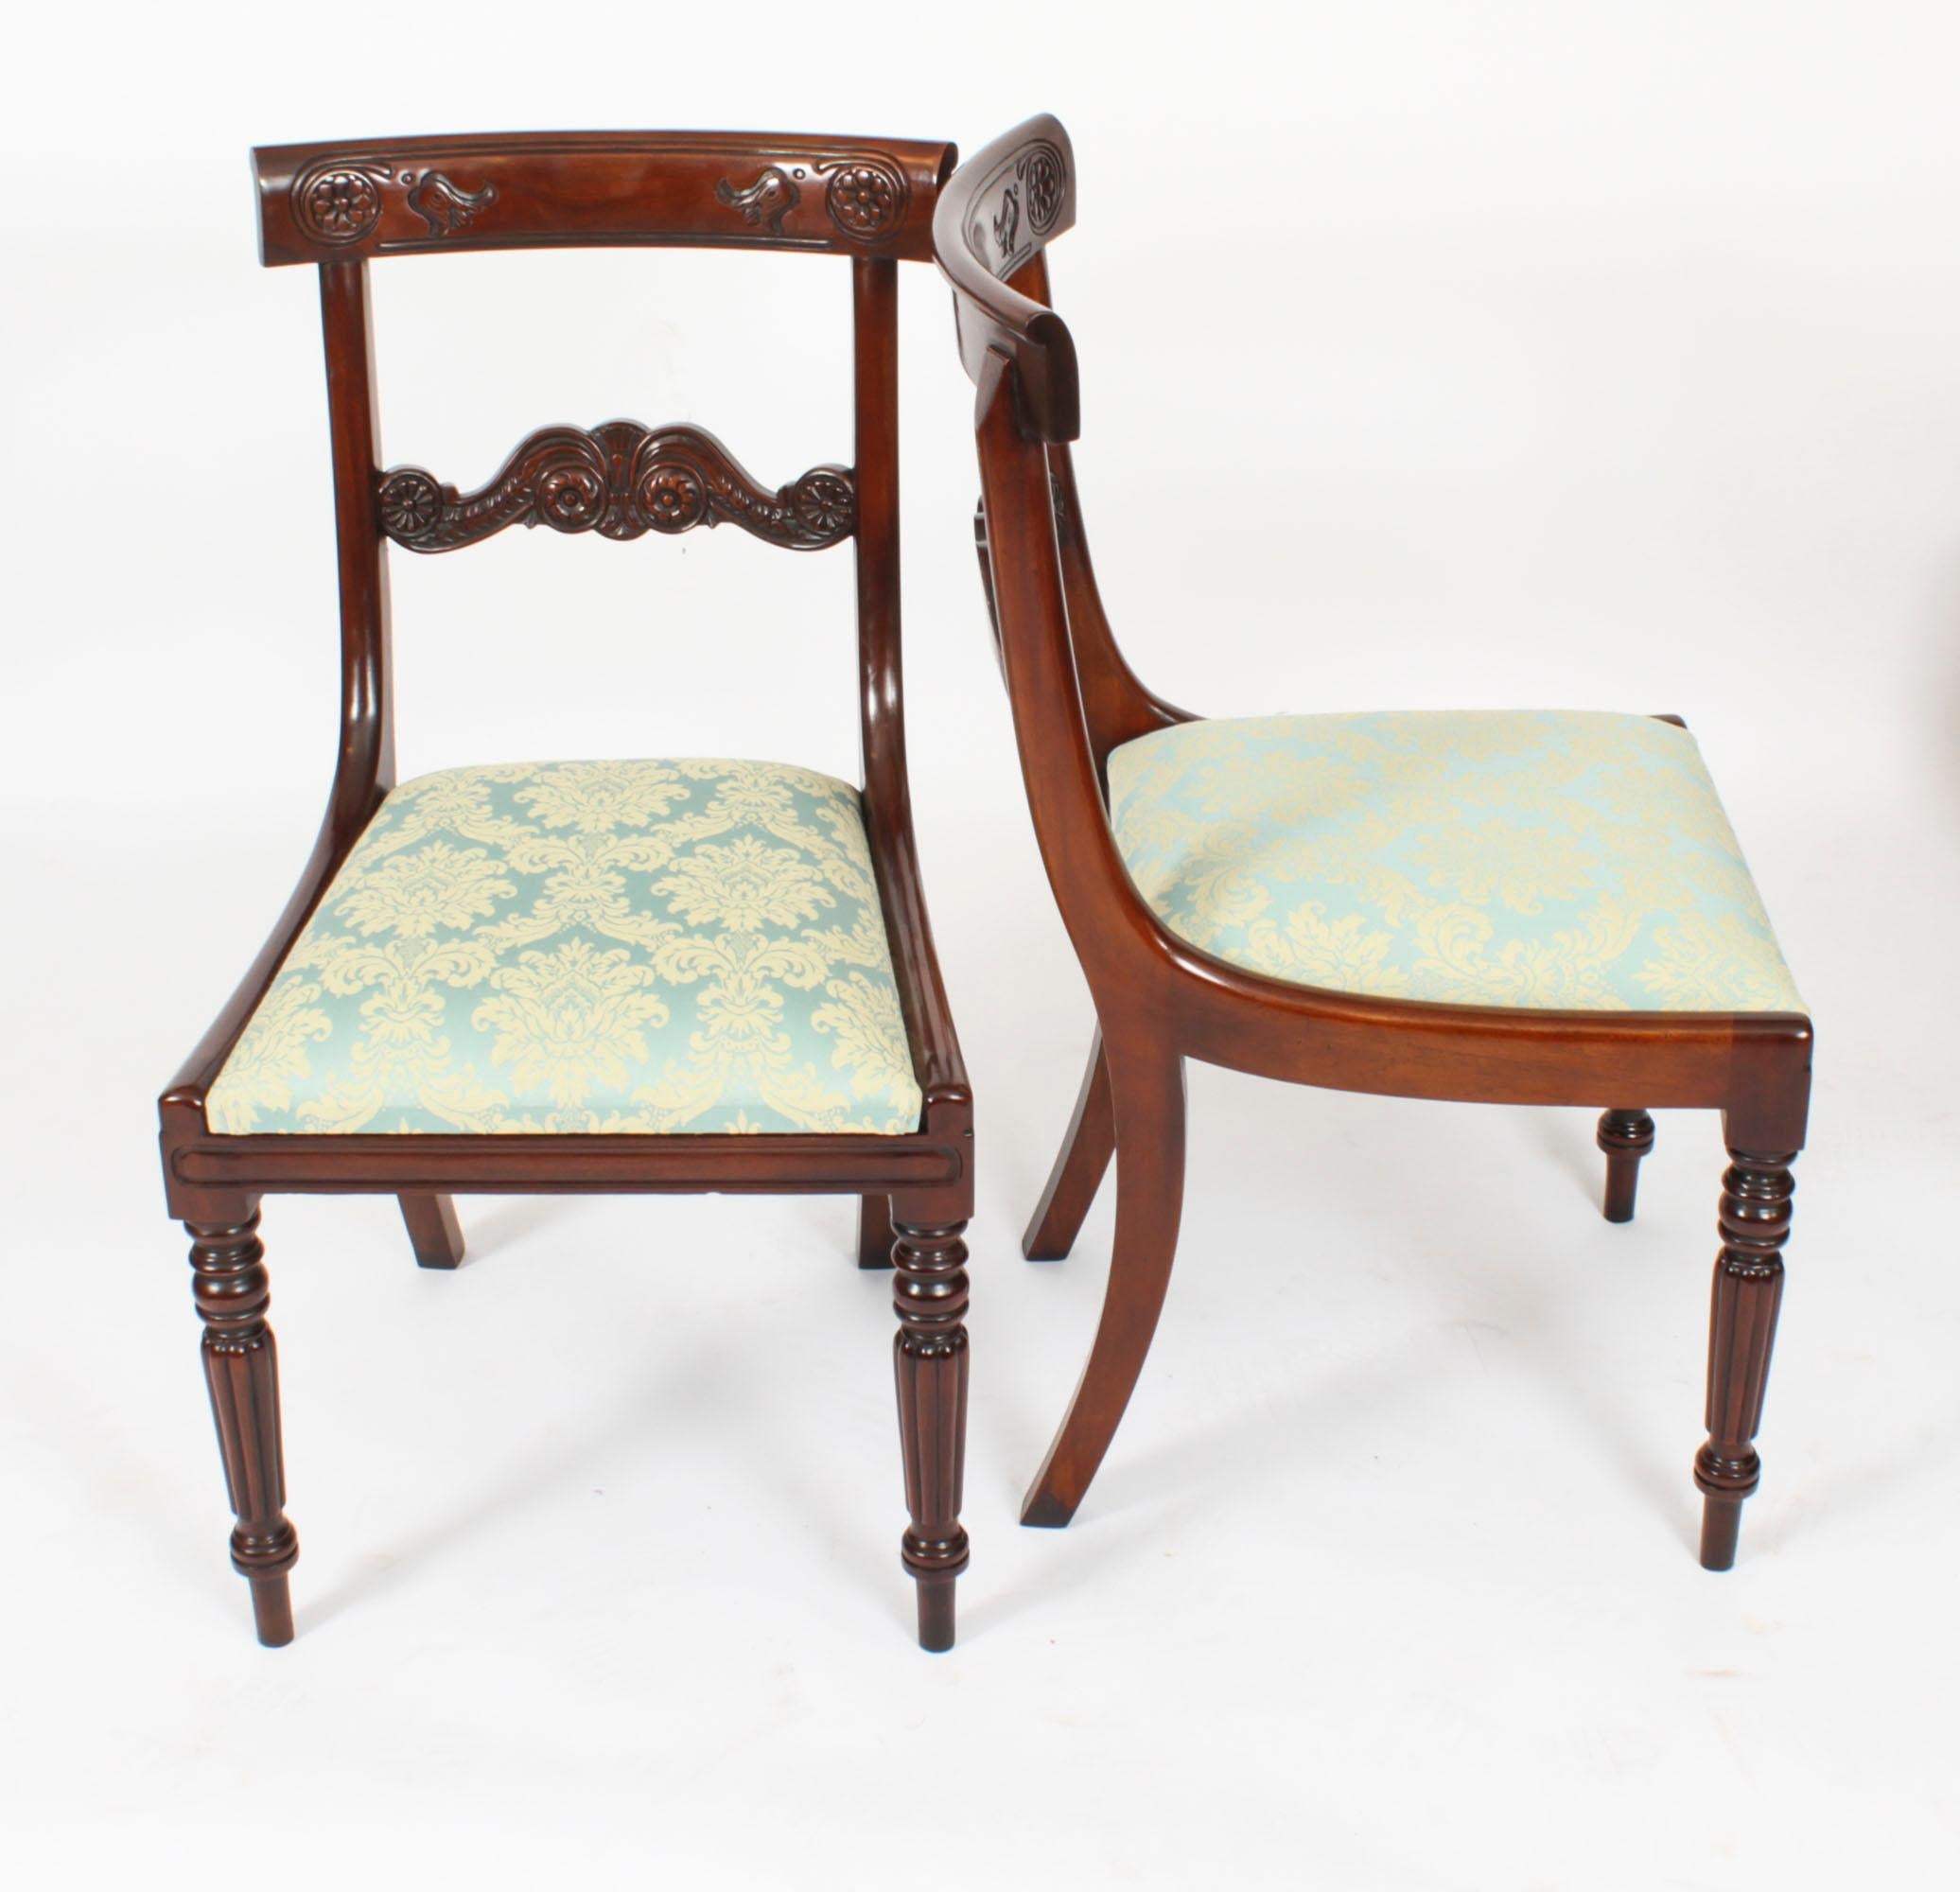 An absolutely fantastic Vintage set of twelve Regency Revival Bar Back dining chairs dating from the second half of the 20th century.

Masterfully hand crafted in beautiful solid flame mahogany,the finish and attention to detail on display are truly